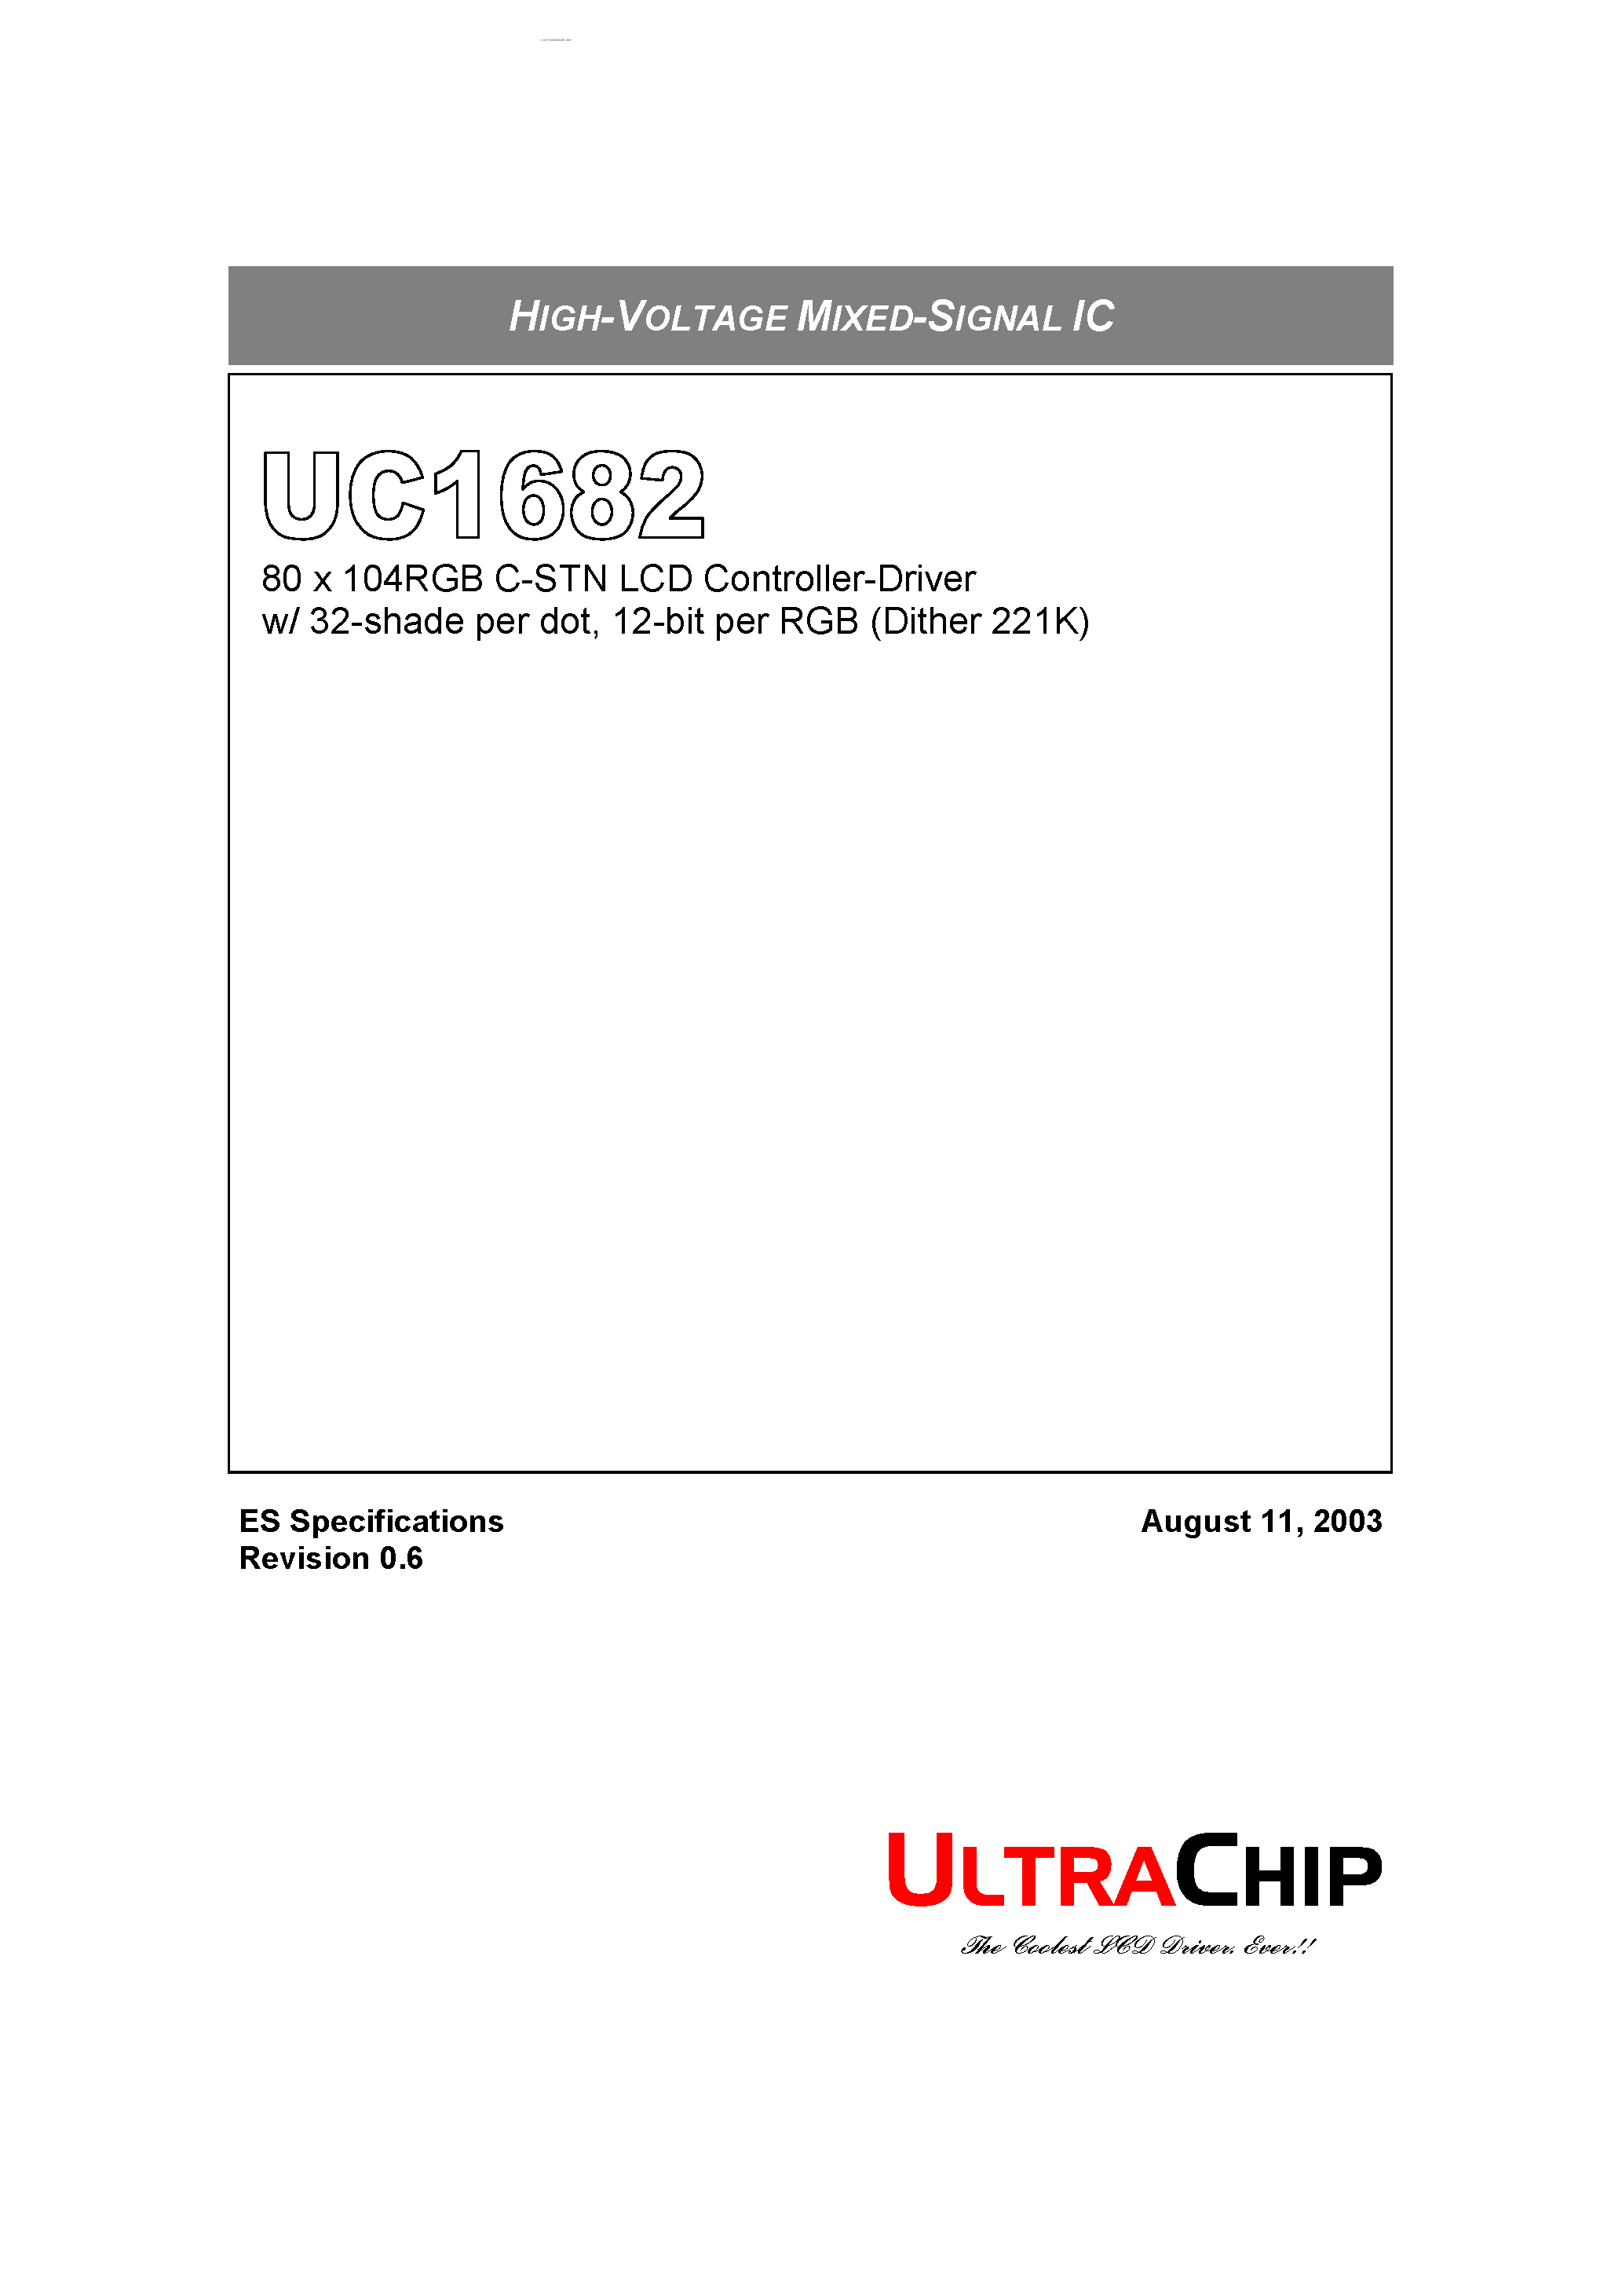 Datasheet UC1682 - HIGH-VOLTAGE MIXED-SIGNAL IC page 1